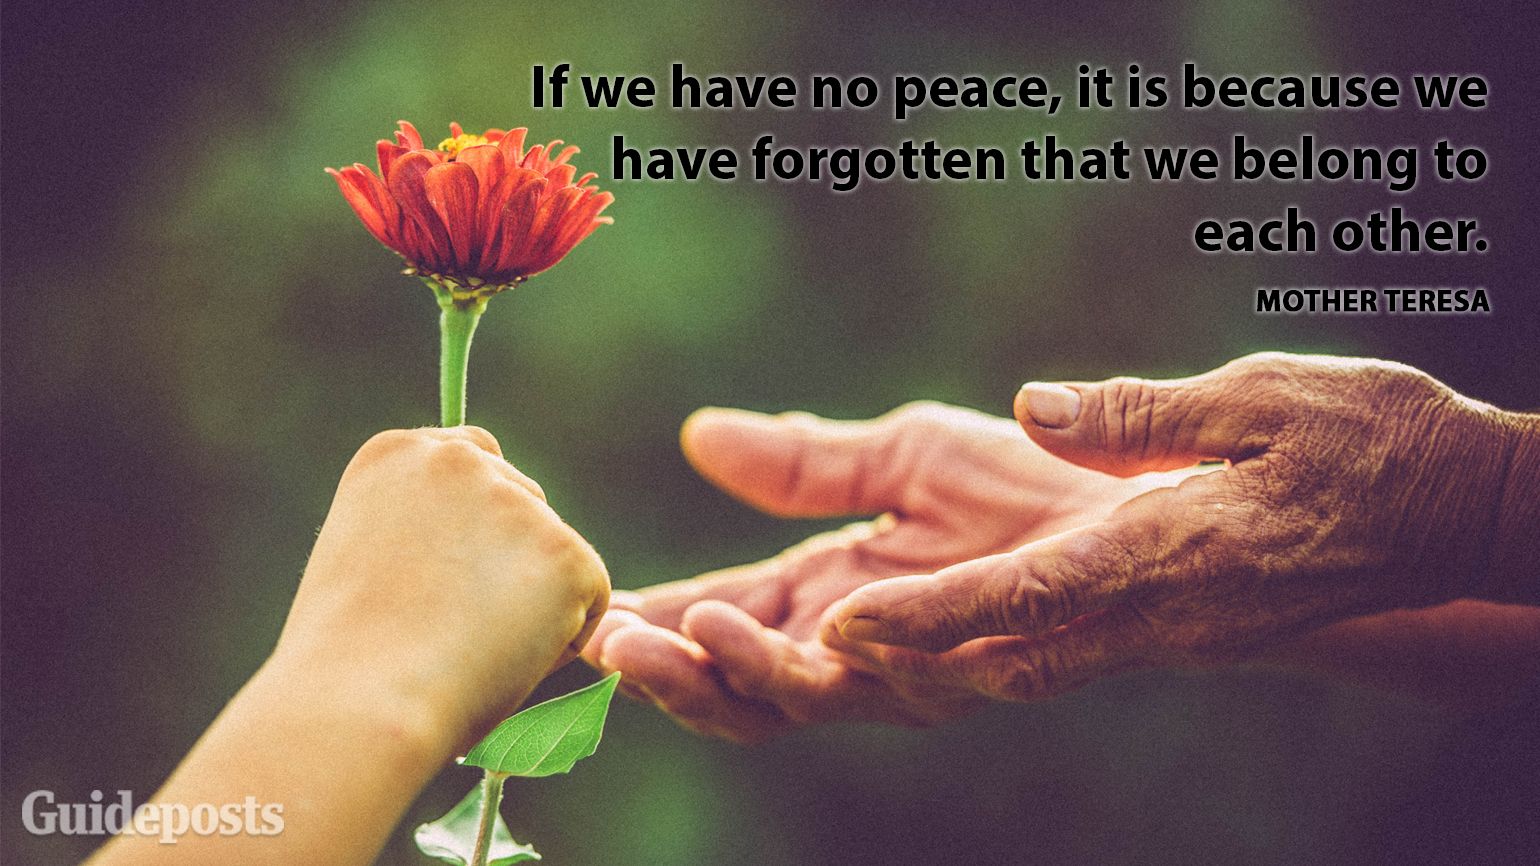 5 Inspiring Quotes About Peace - Guideposts